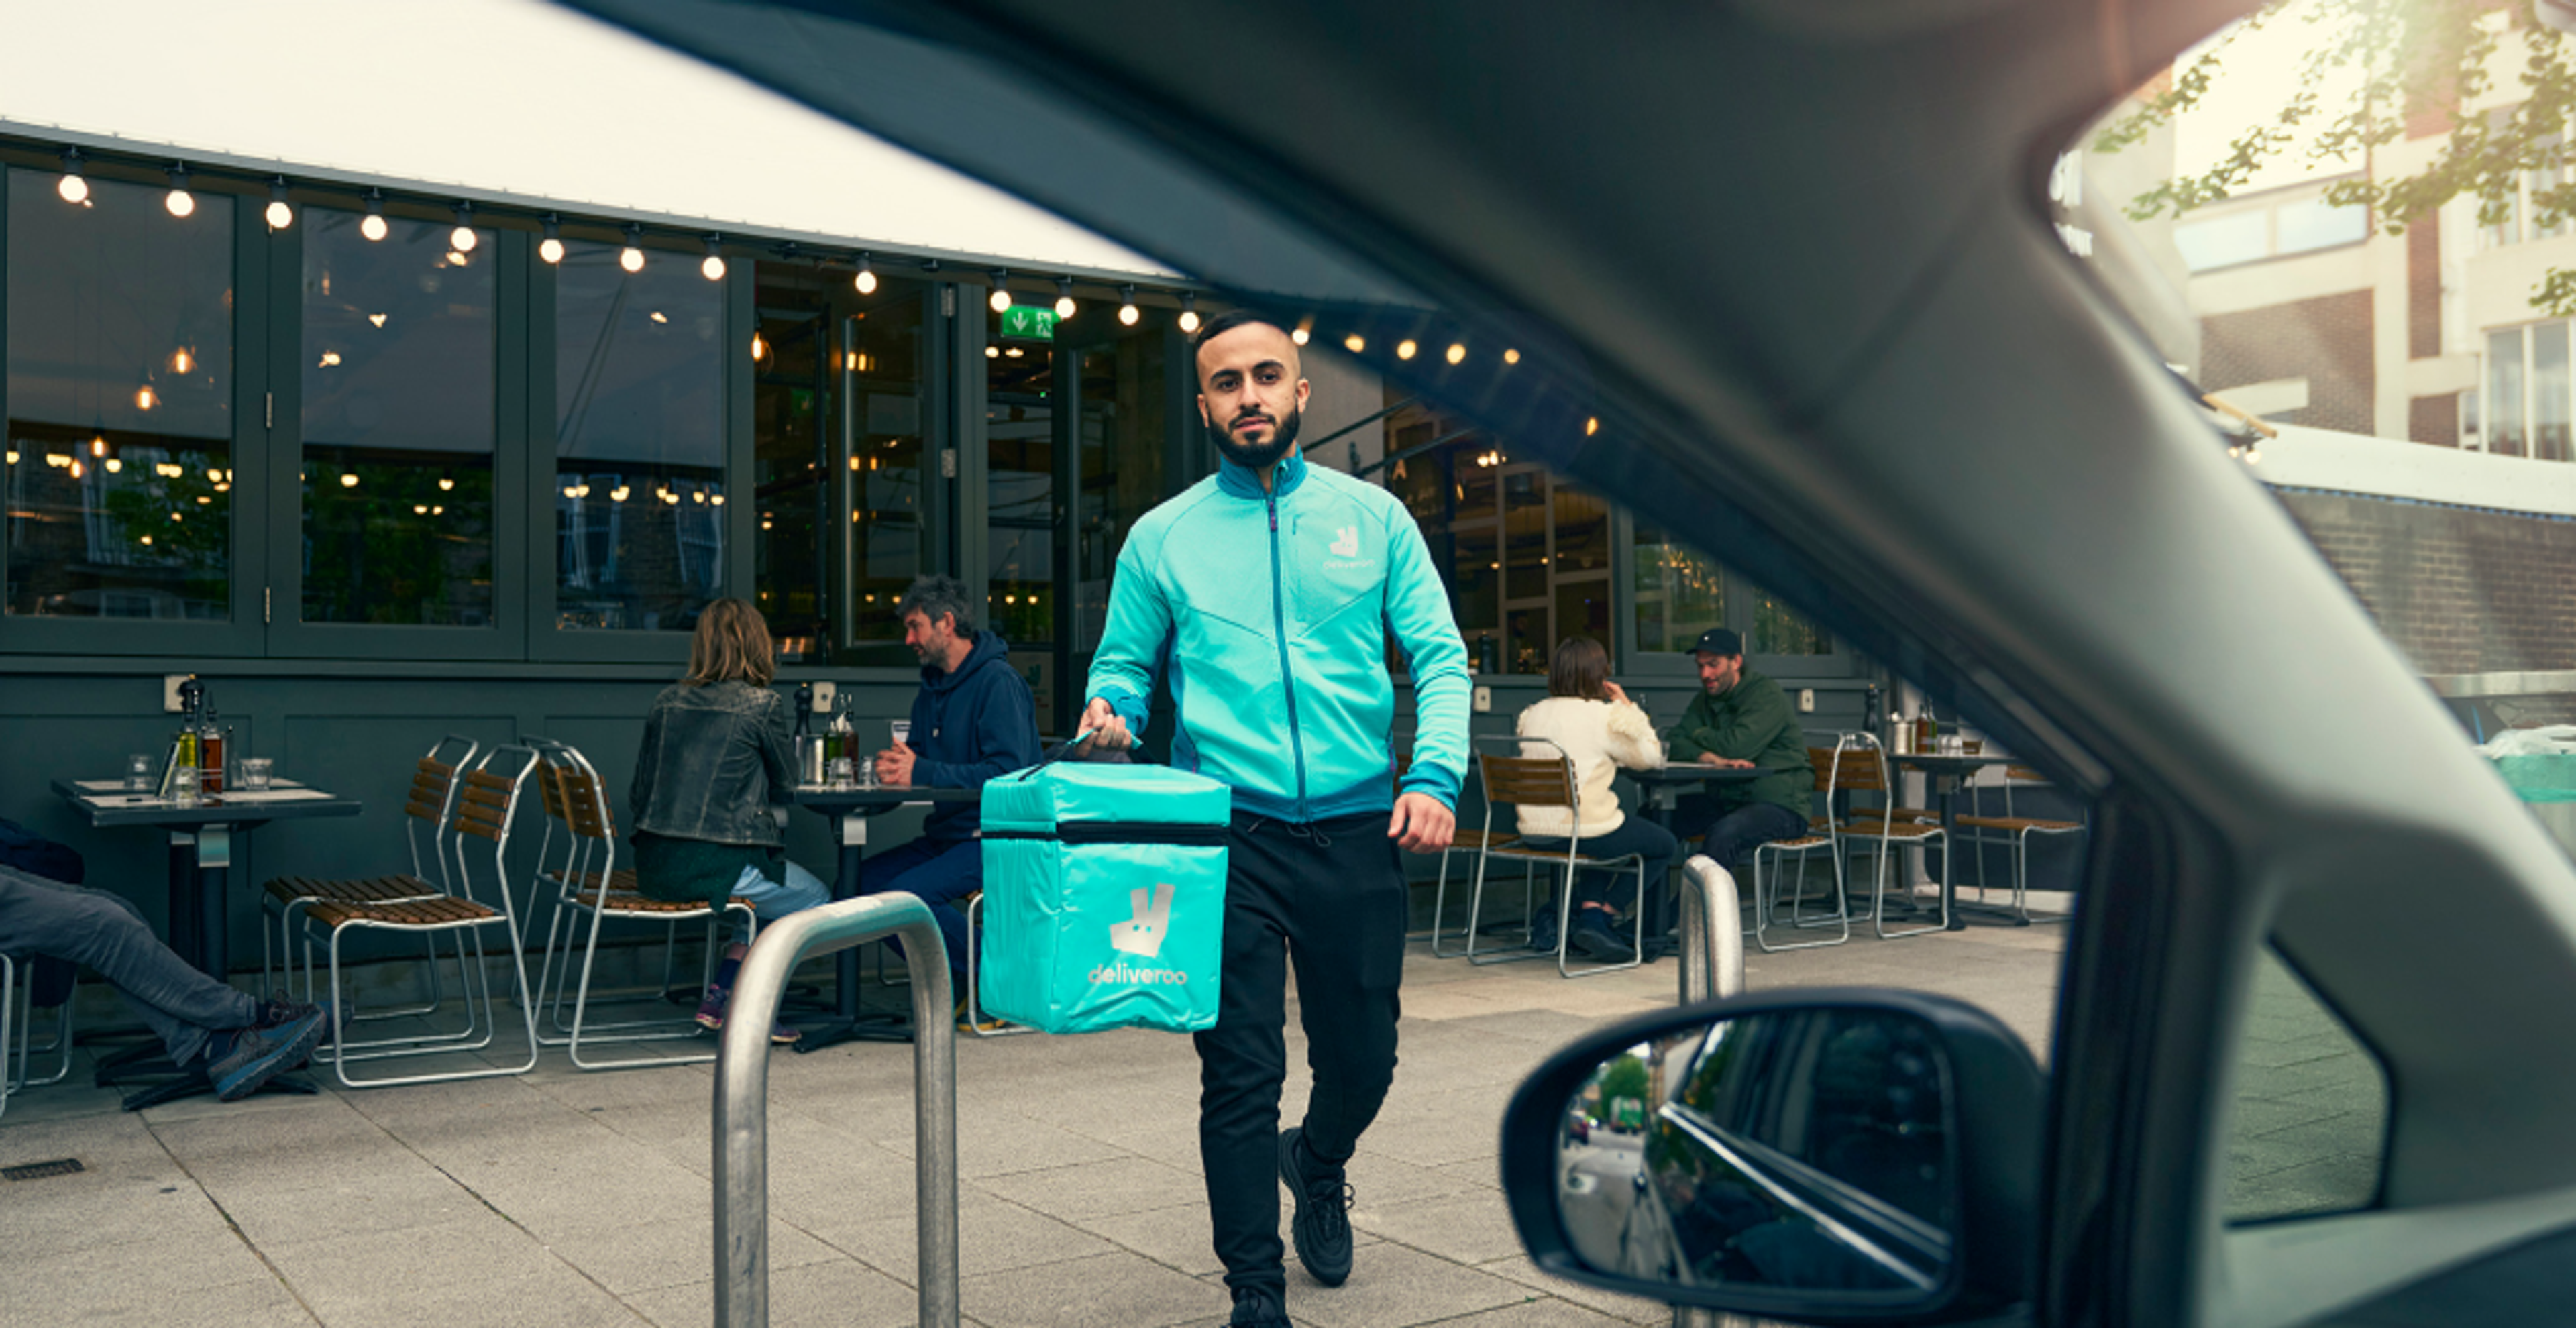 Zego Deliveroo Car Delivery Insurance Driver